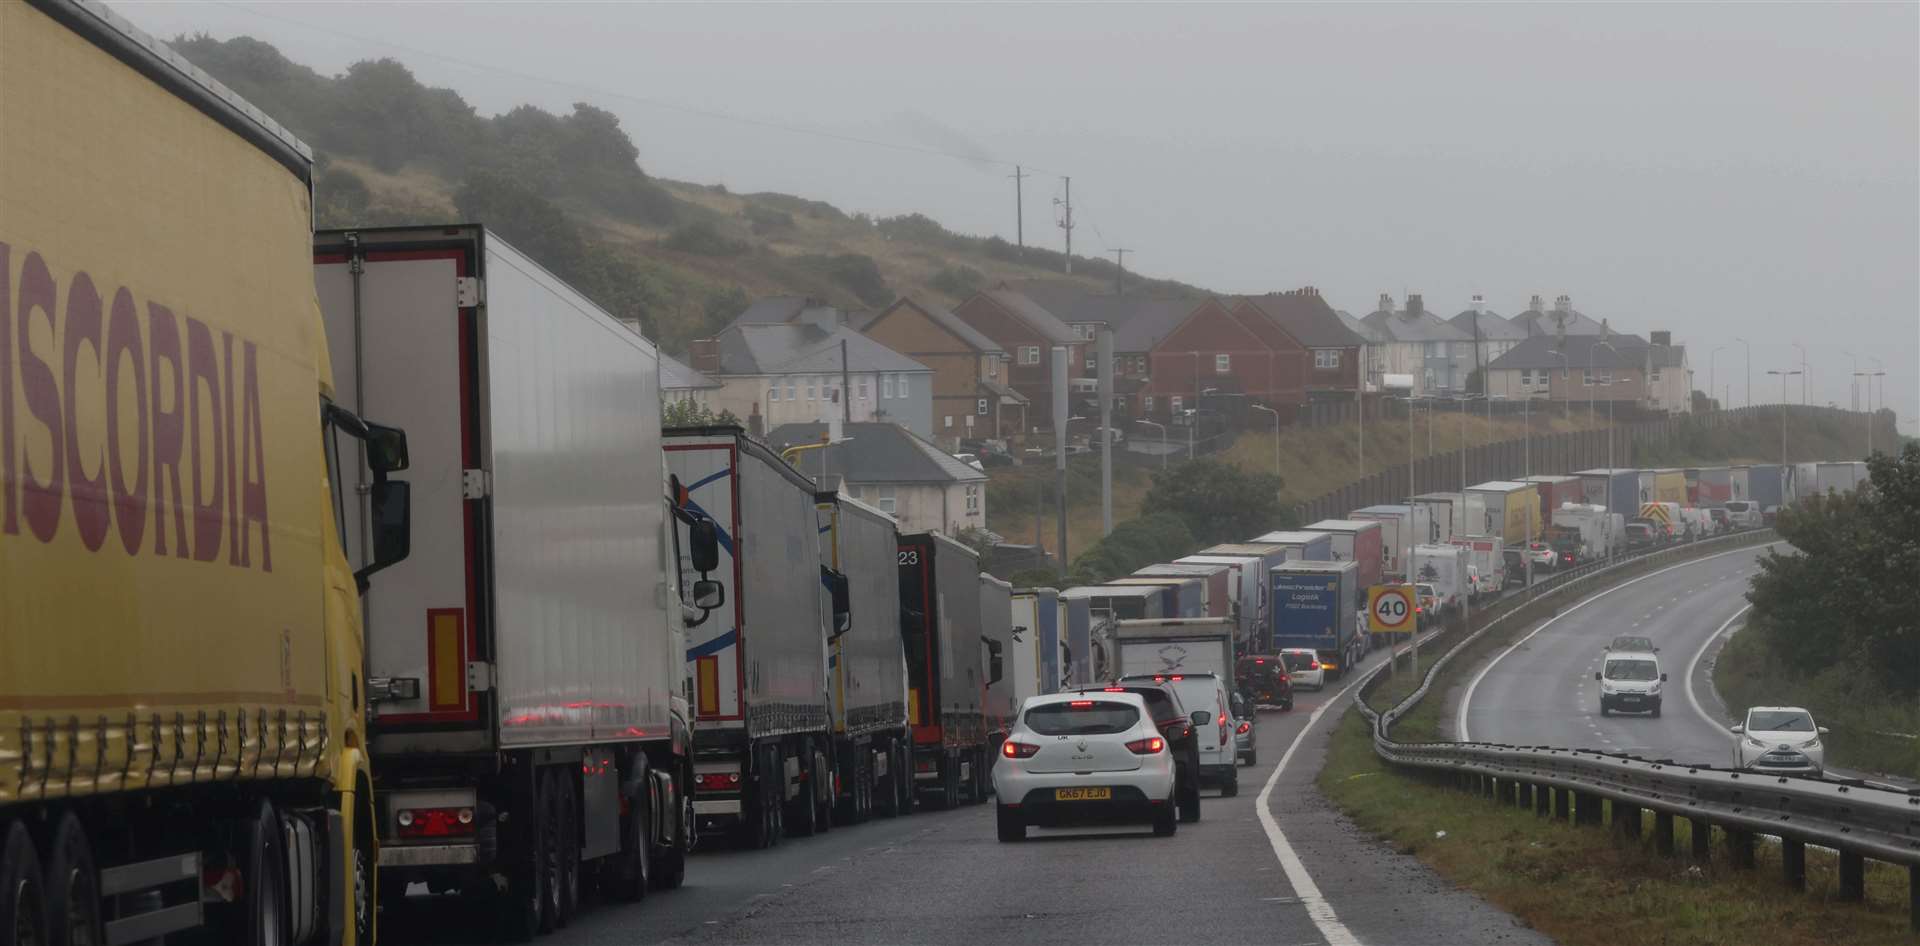 Processing delays are causing significant waiting times for travellers. Photo: UKNIP